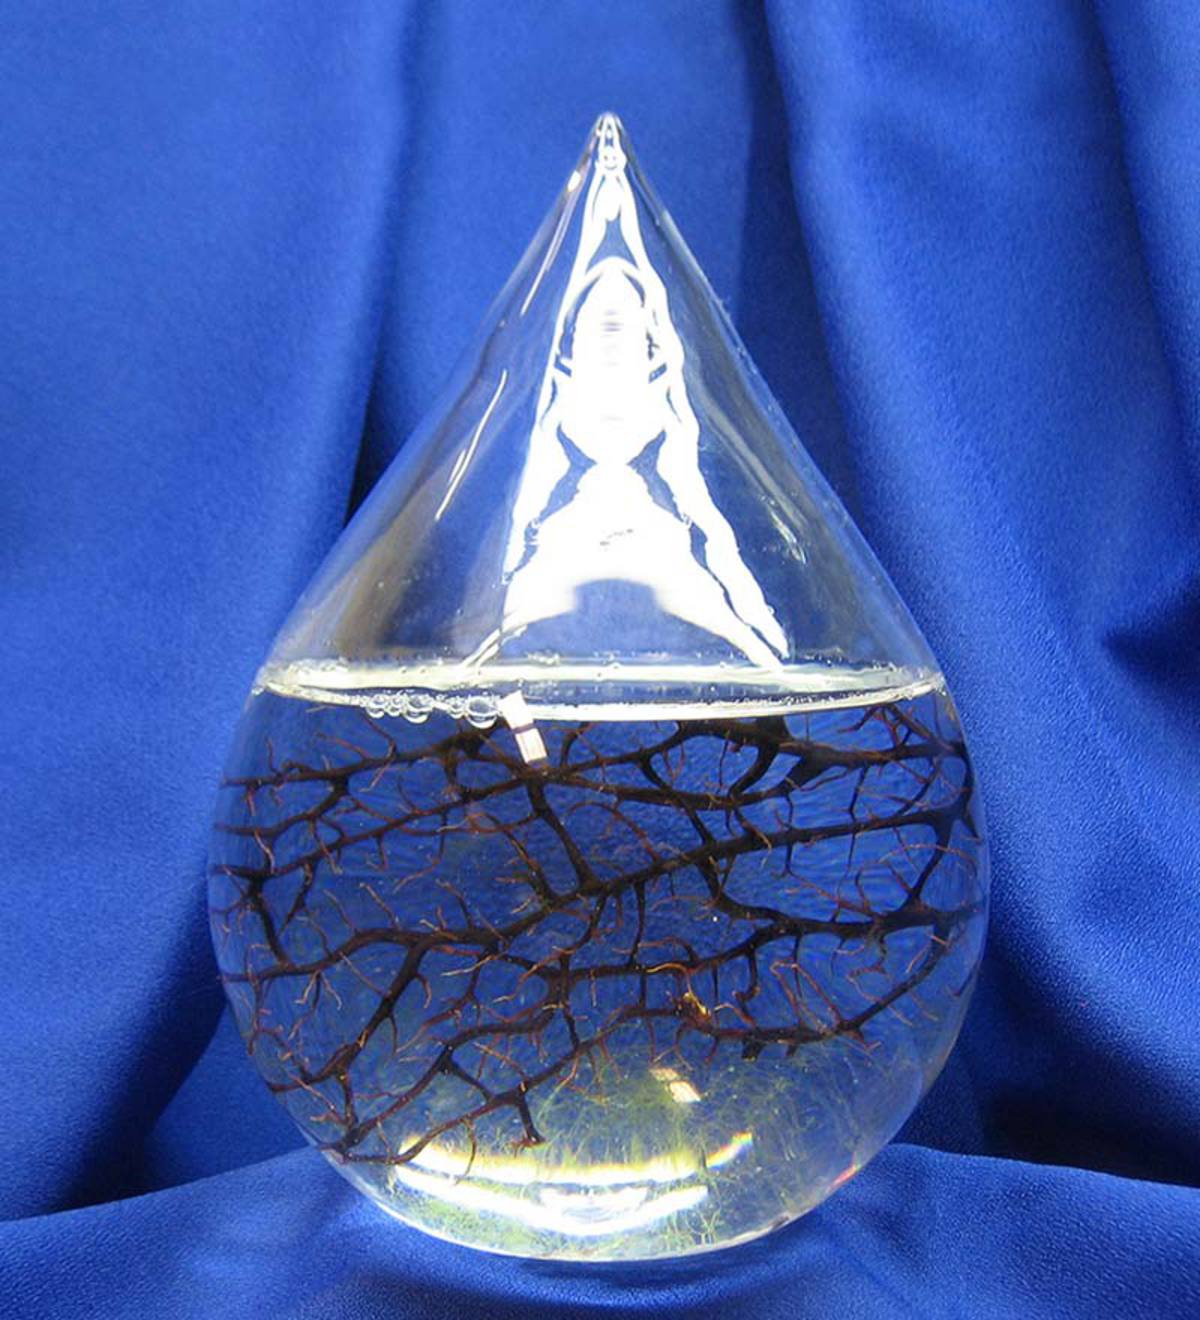 EcoSphere Small Water Drop, The World's First Totally Enclosed